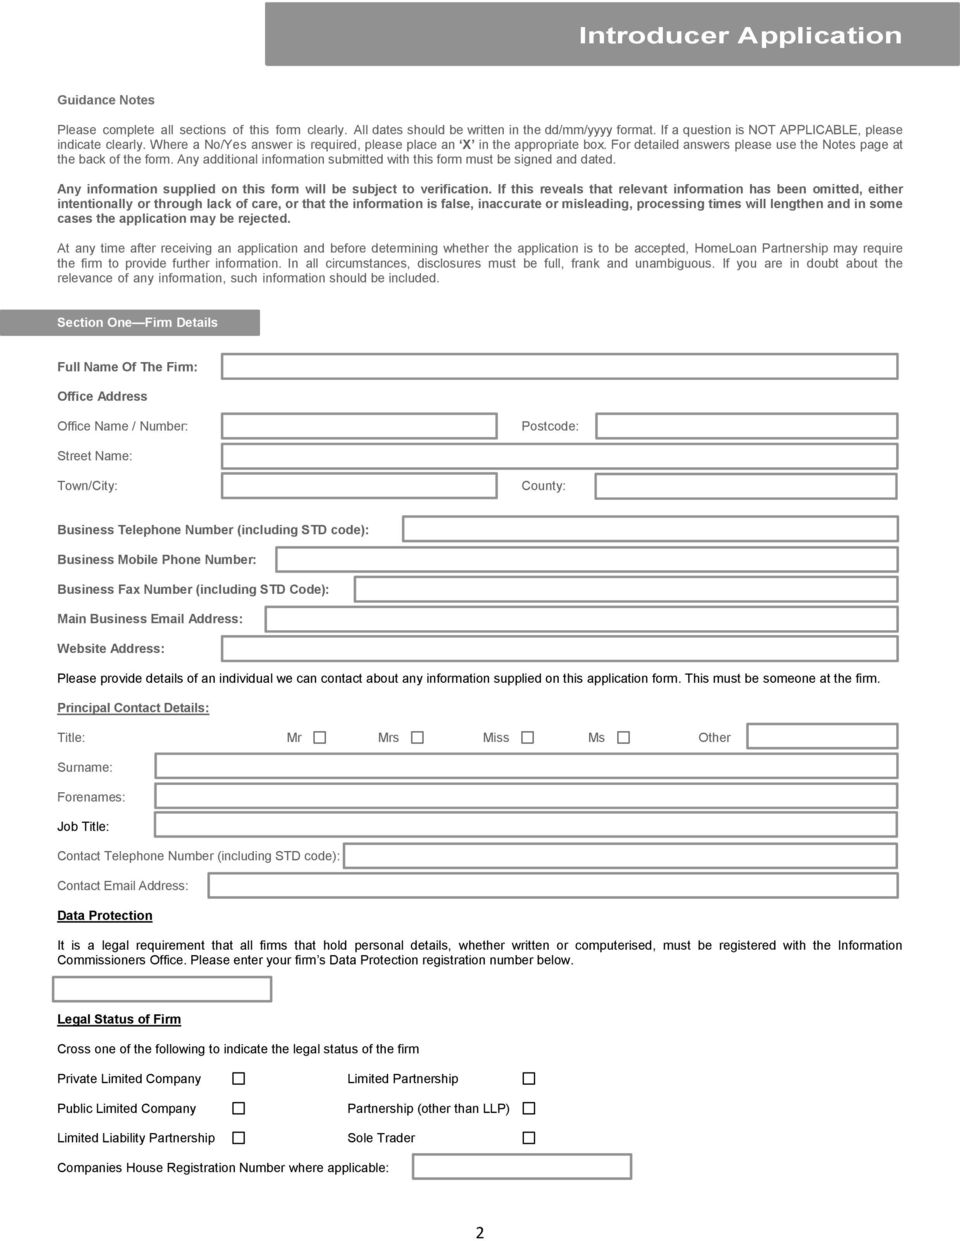 Any additional information submitted with this form must be signed and dated. Any information supplied on this form will be subject to verification.